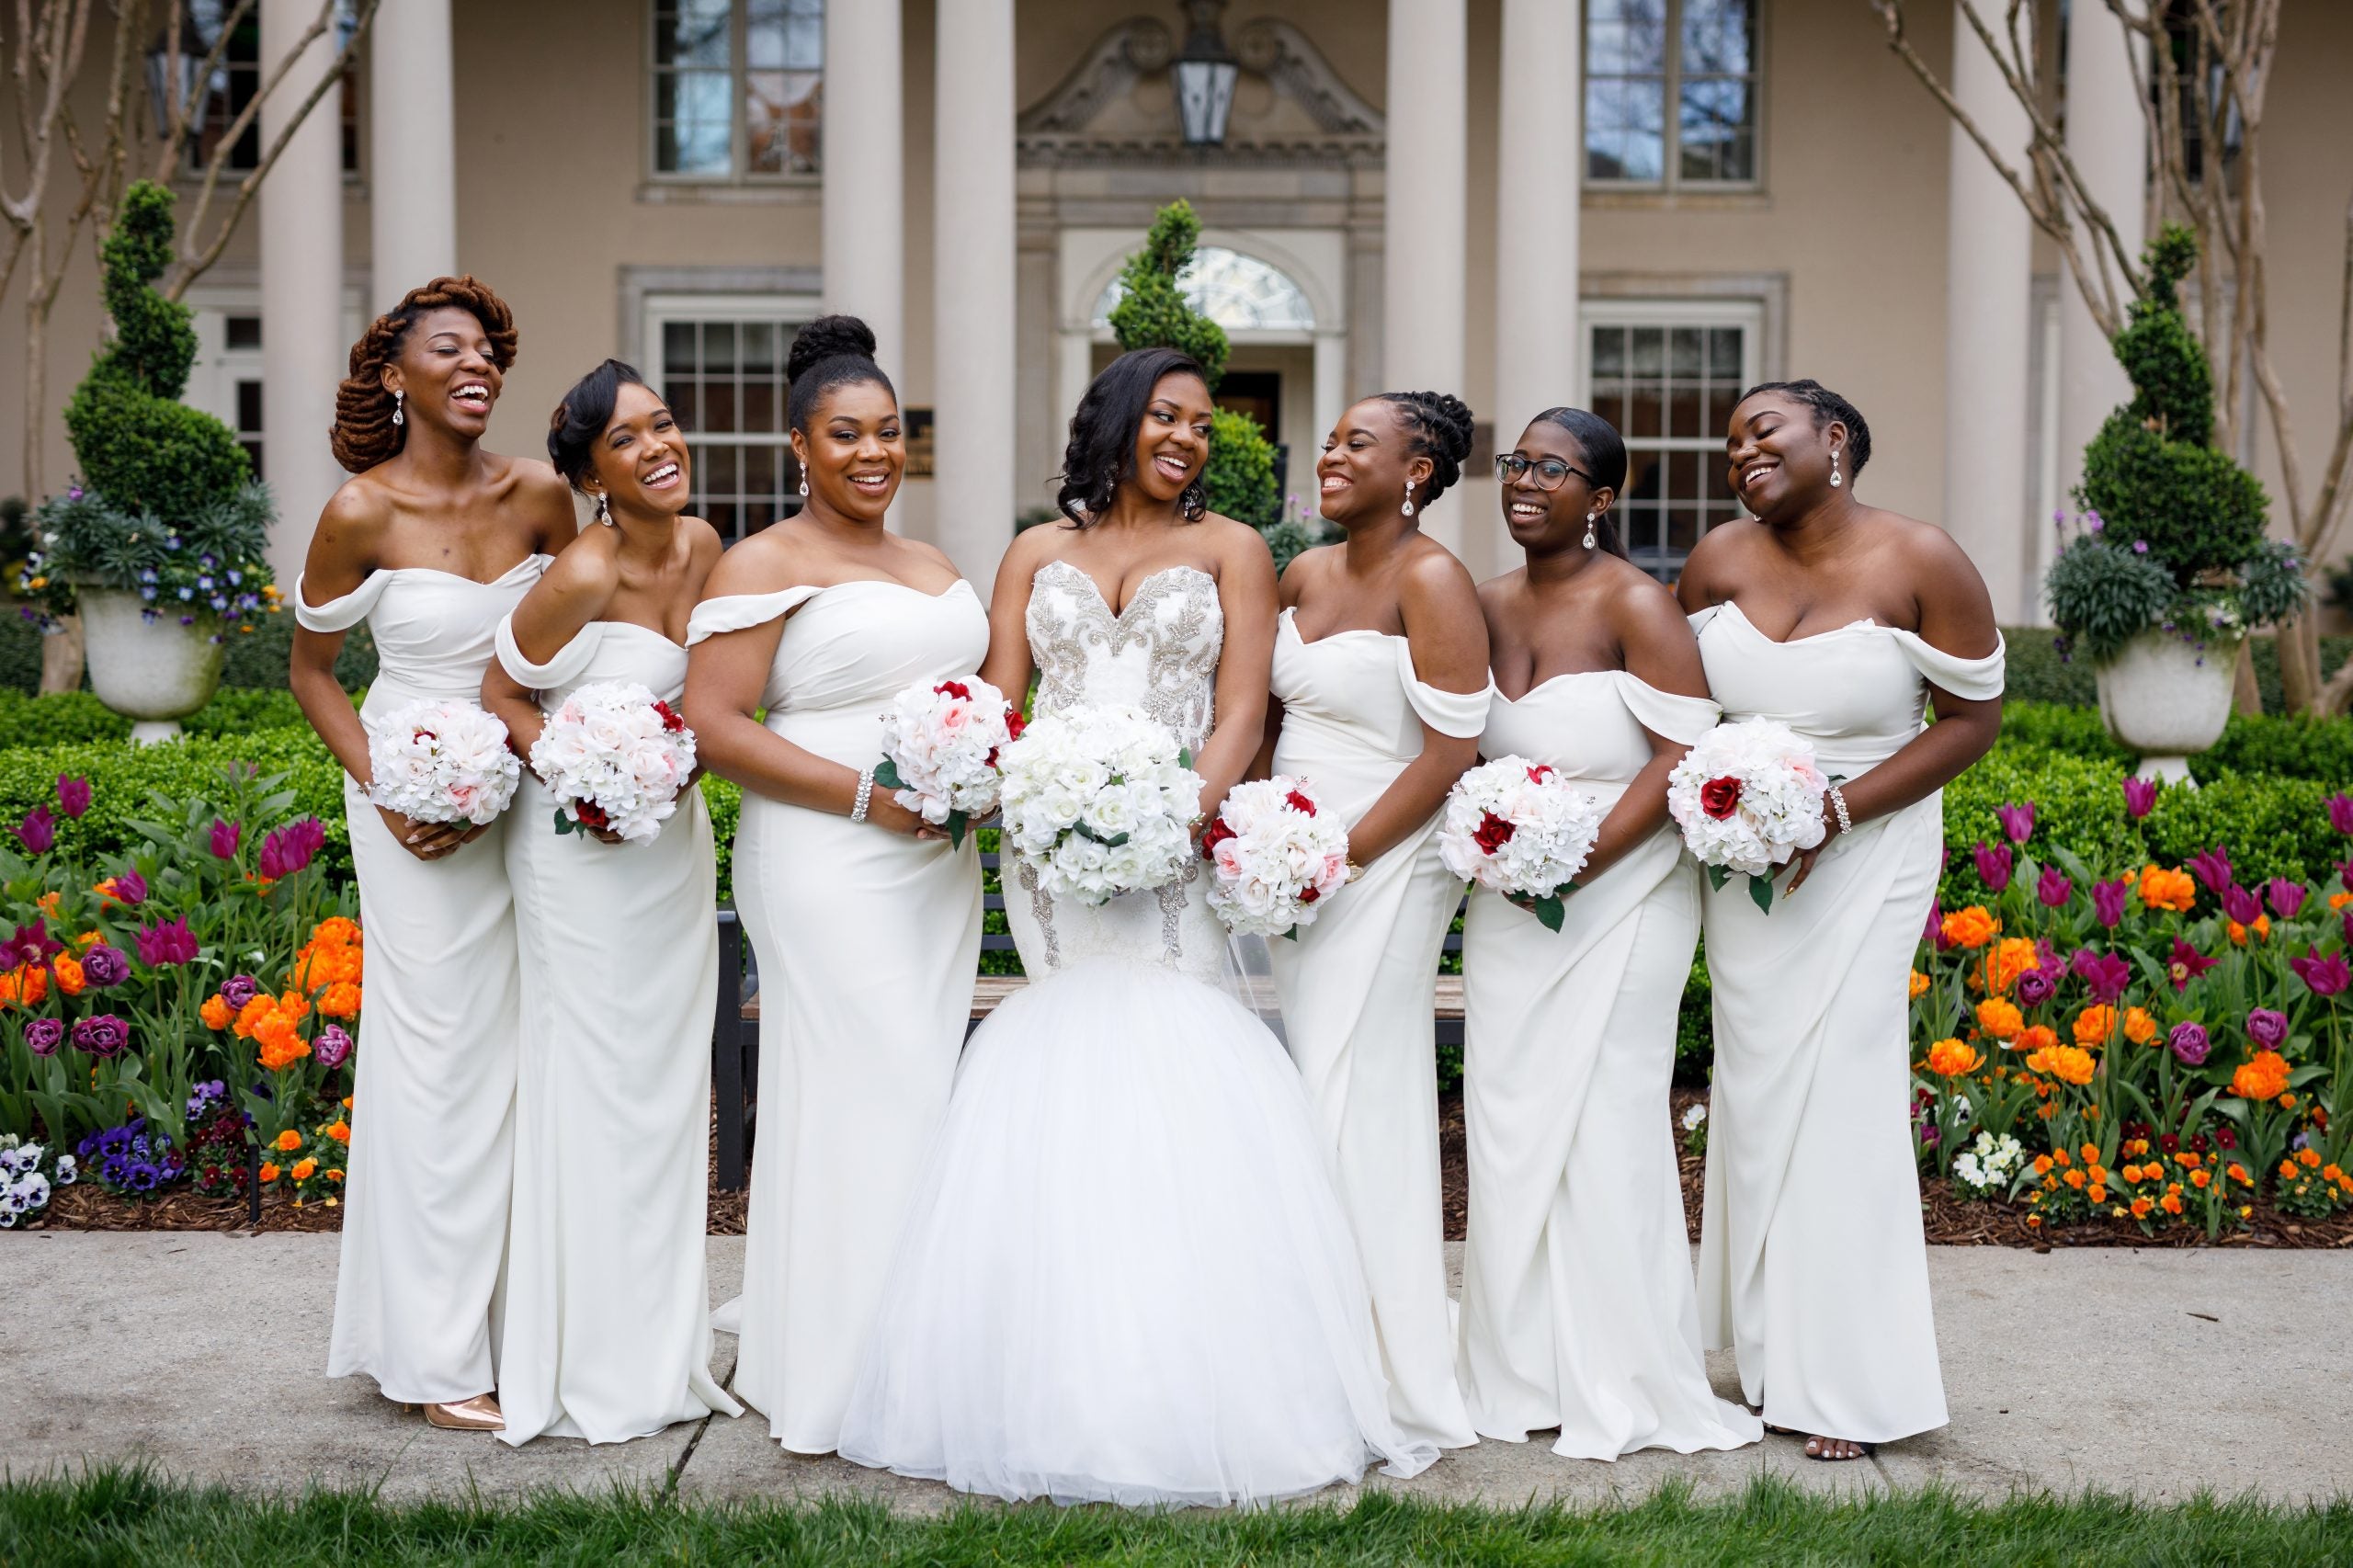 Bridal Bliss: The Bride (And Her Bridesmaids) Wore White At This Ballroom Wedding